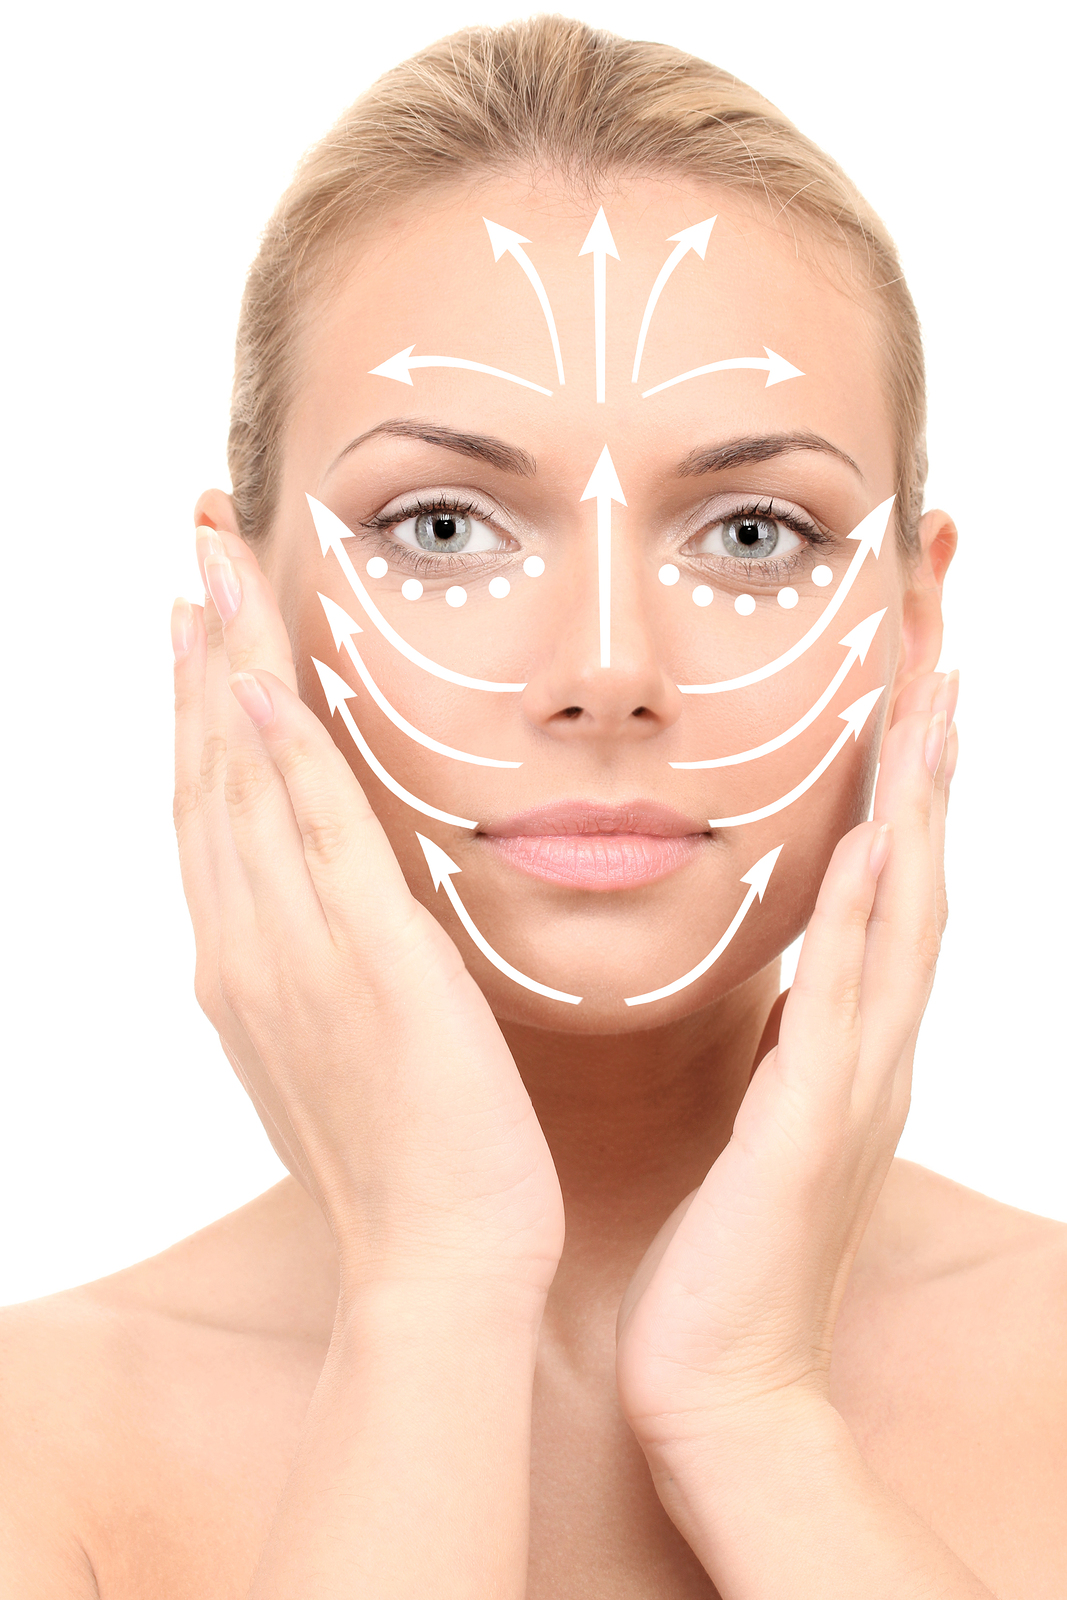 How Can A Facial Workout Be Beneficial For Your Skin